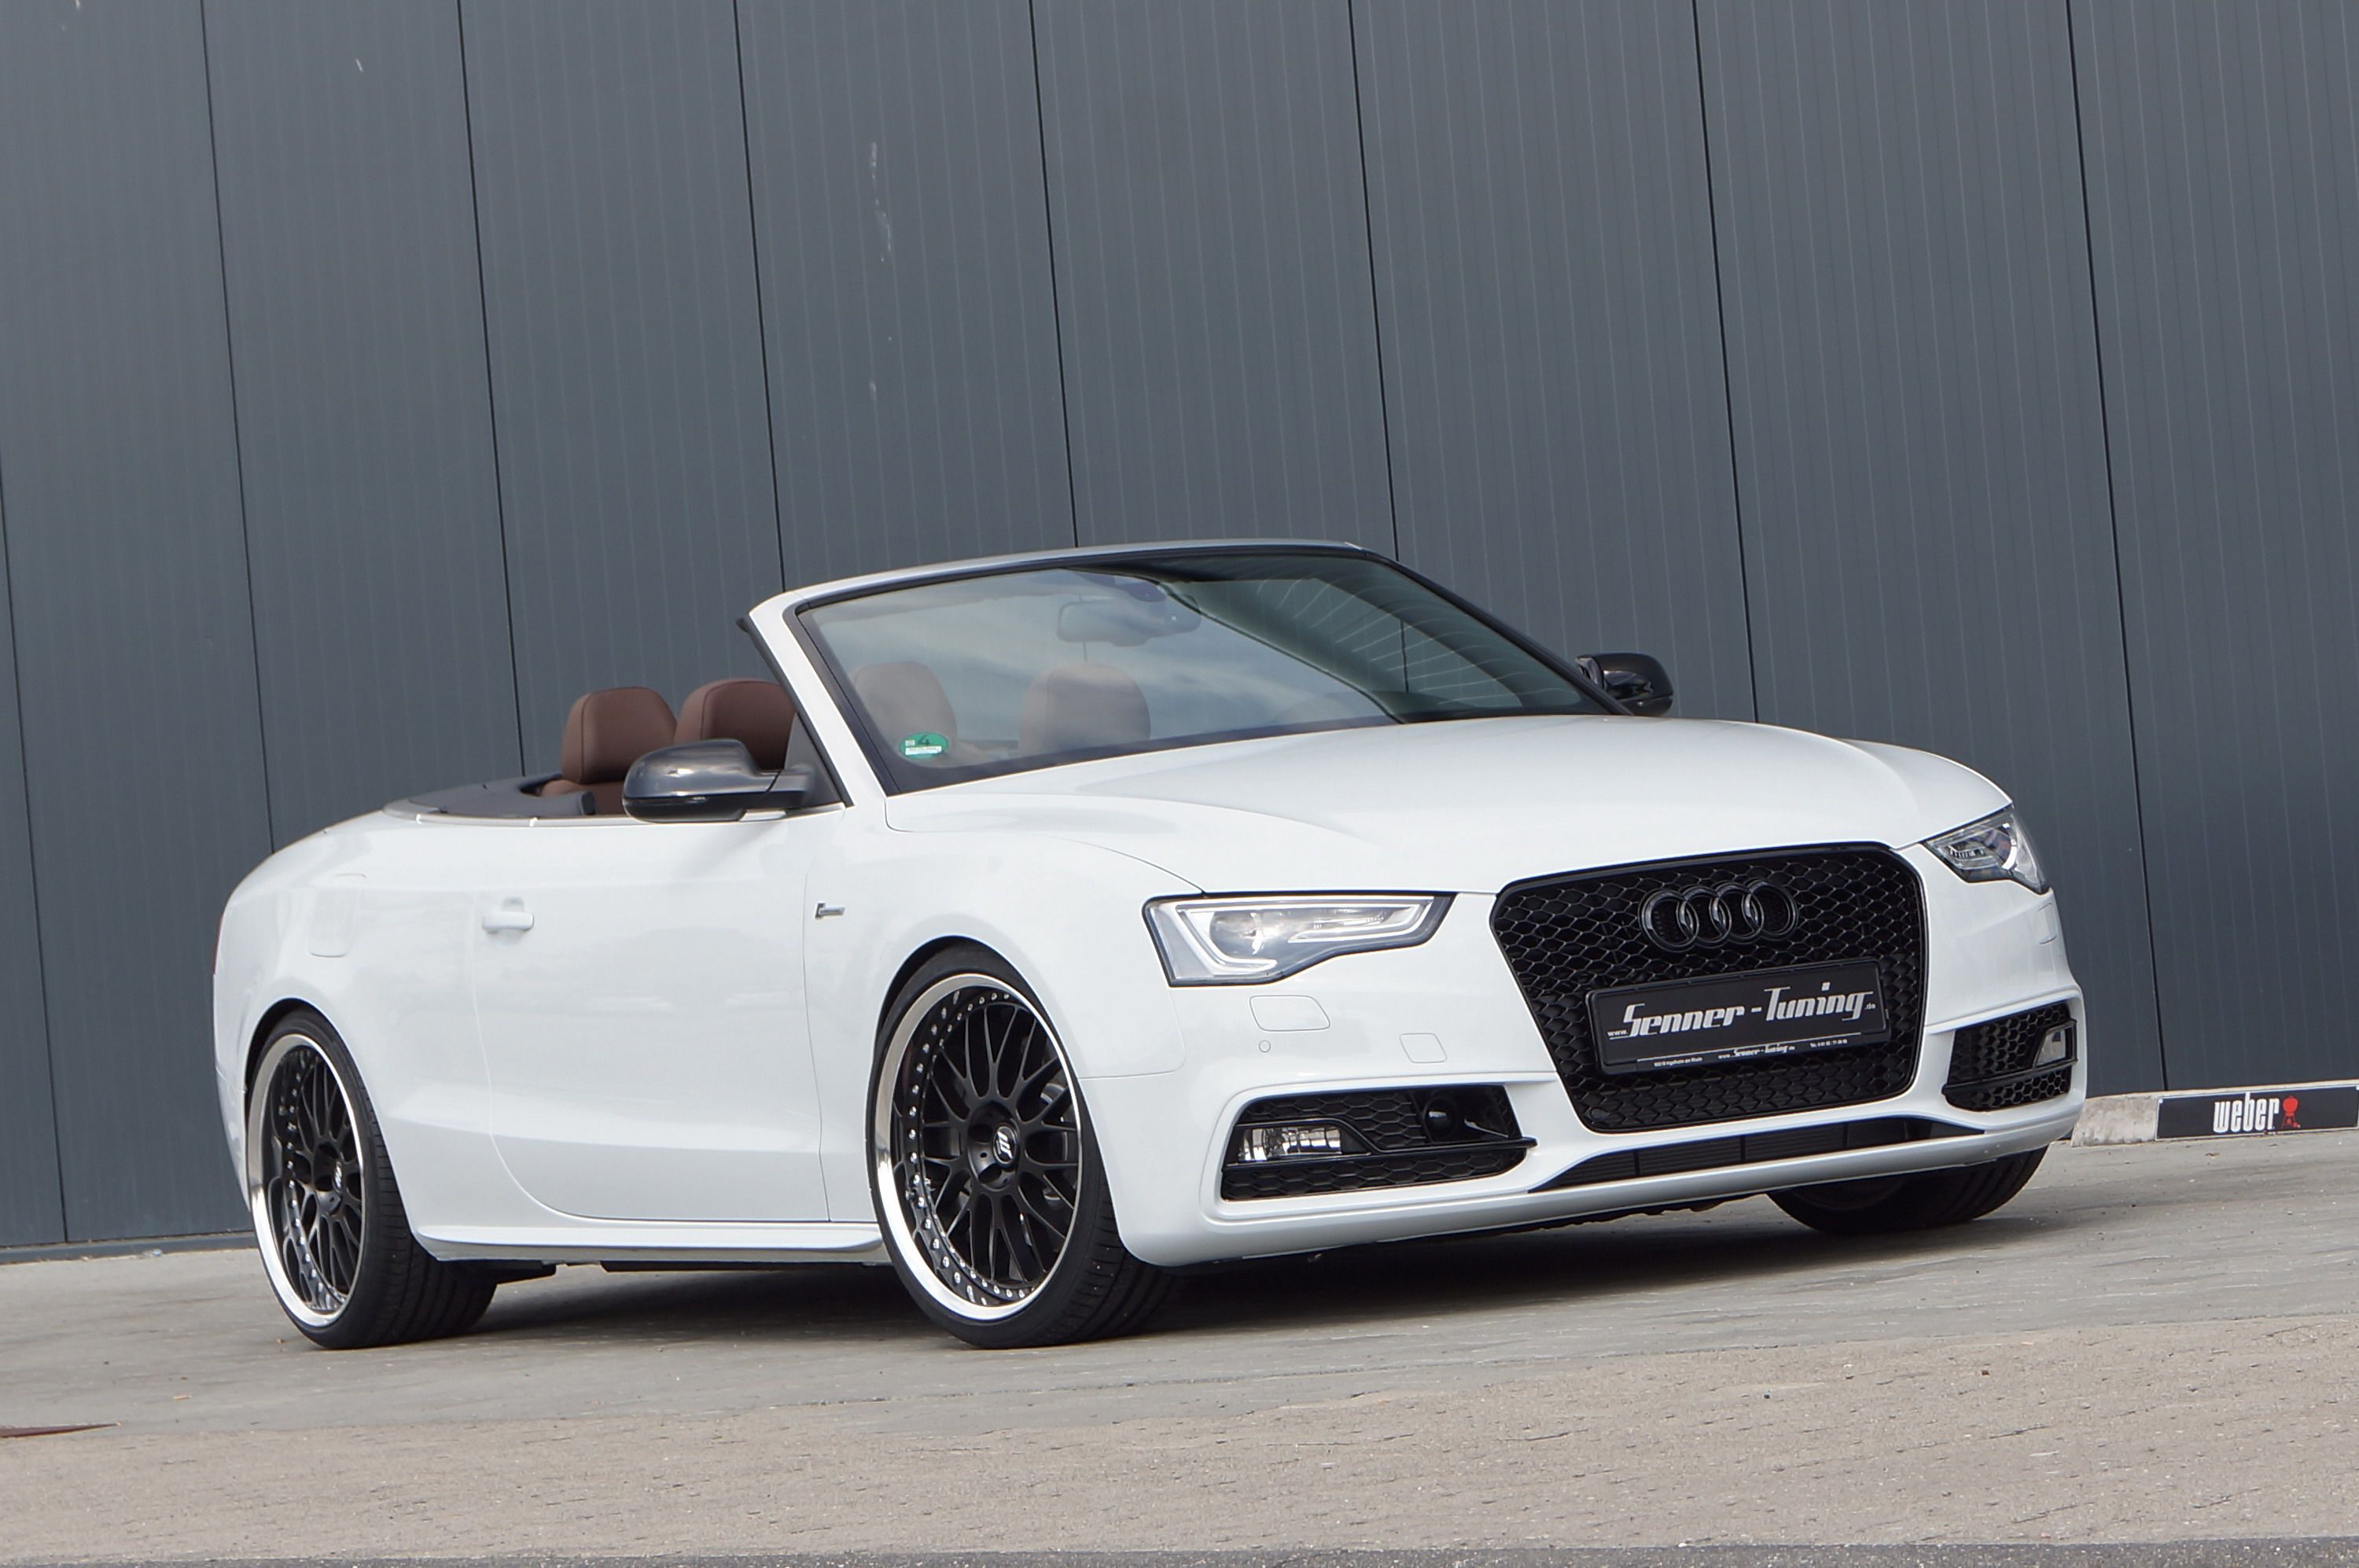 2013 Audi S5 Convertible by Senner Tuning